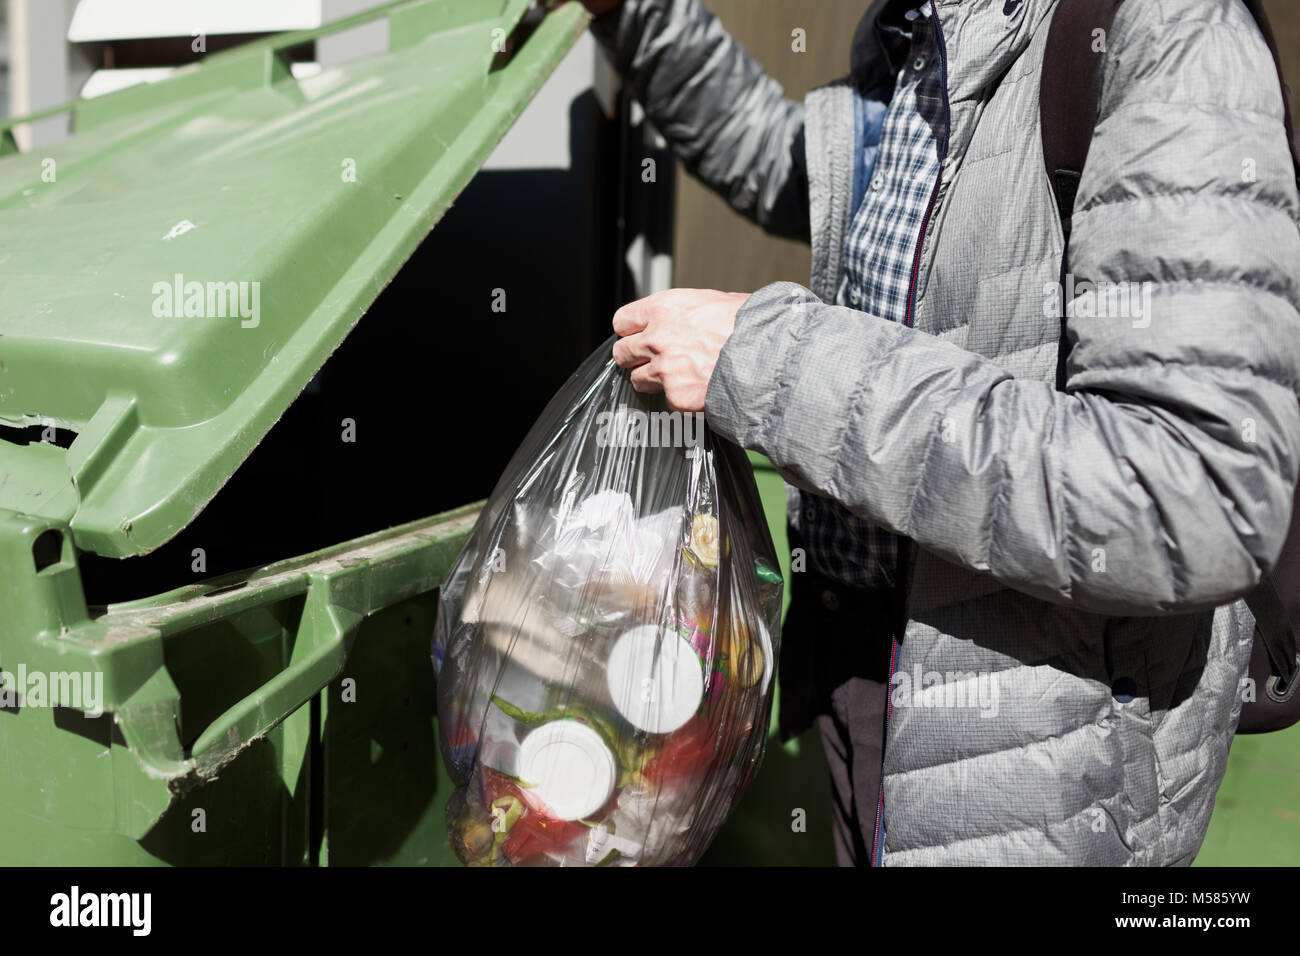 Man puts unsorted garbage in trash Stock Photo